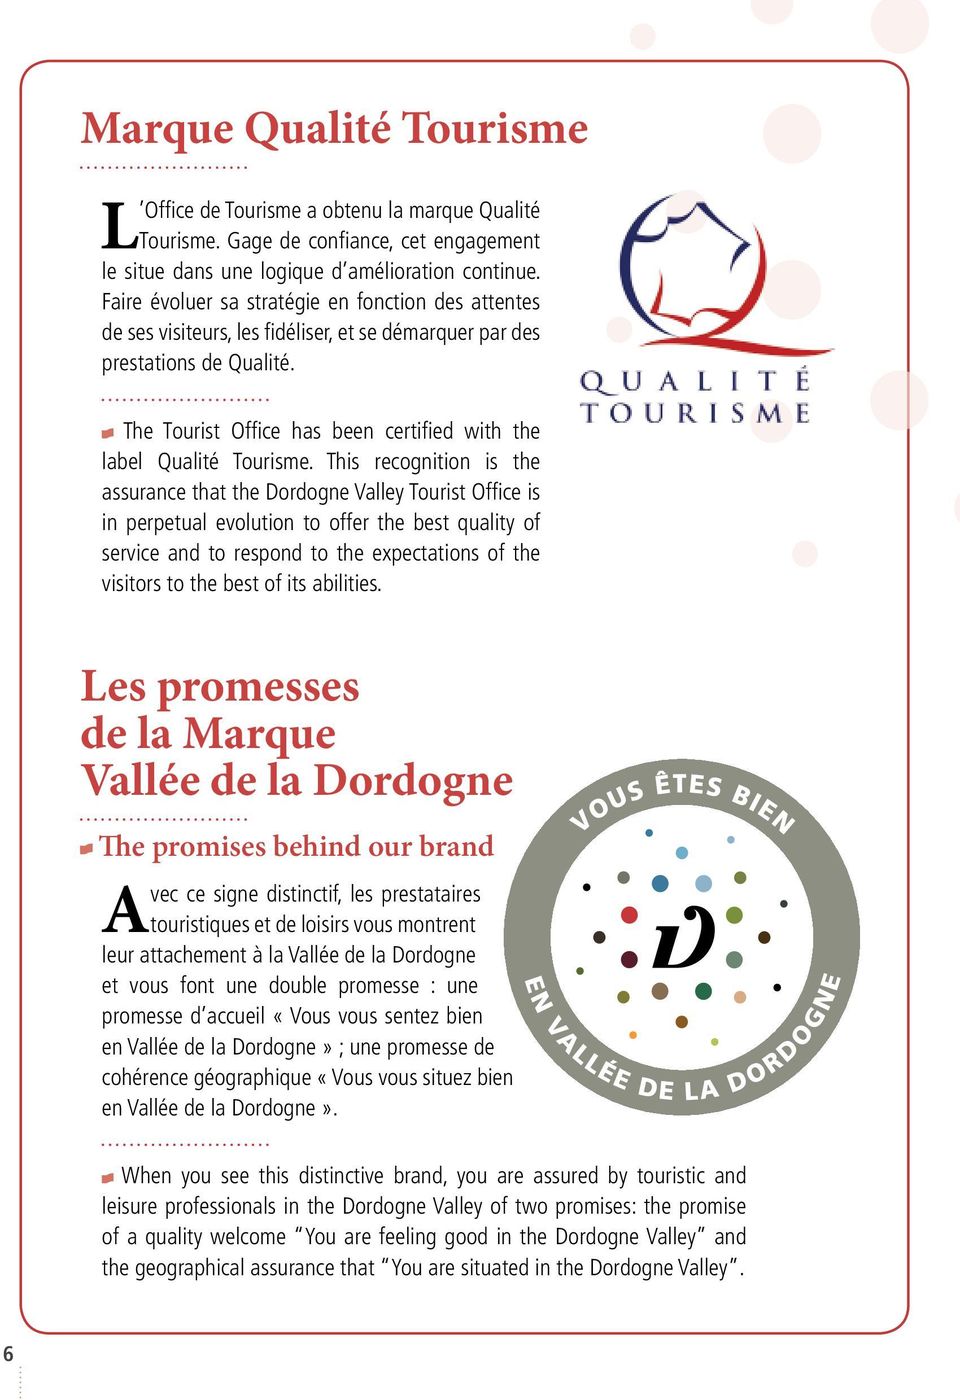 The Tourist Office has been certified with the label Qualité Tourisme.